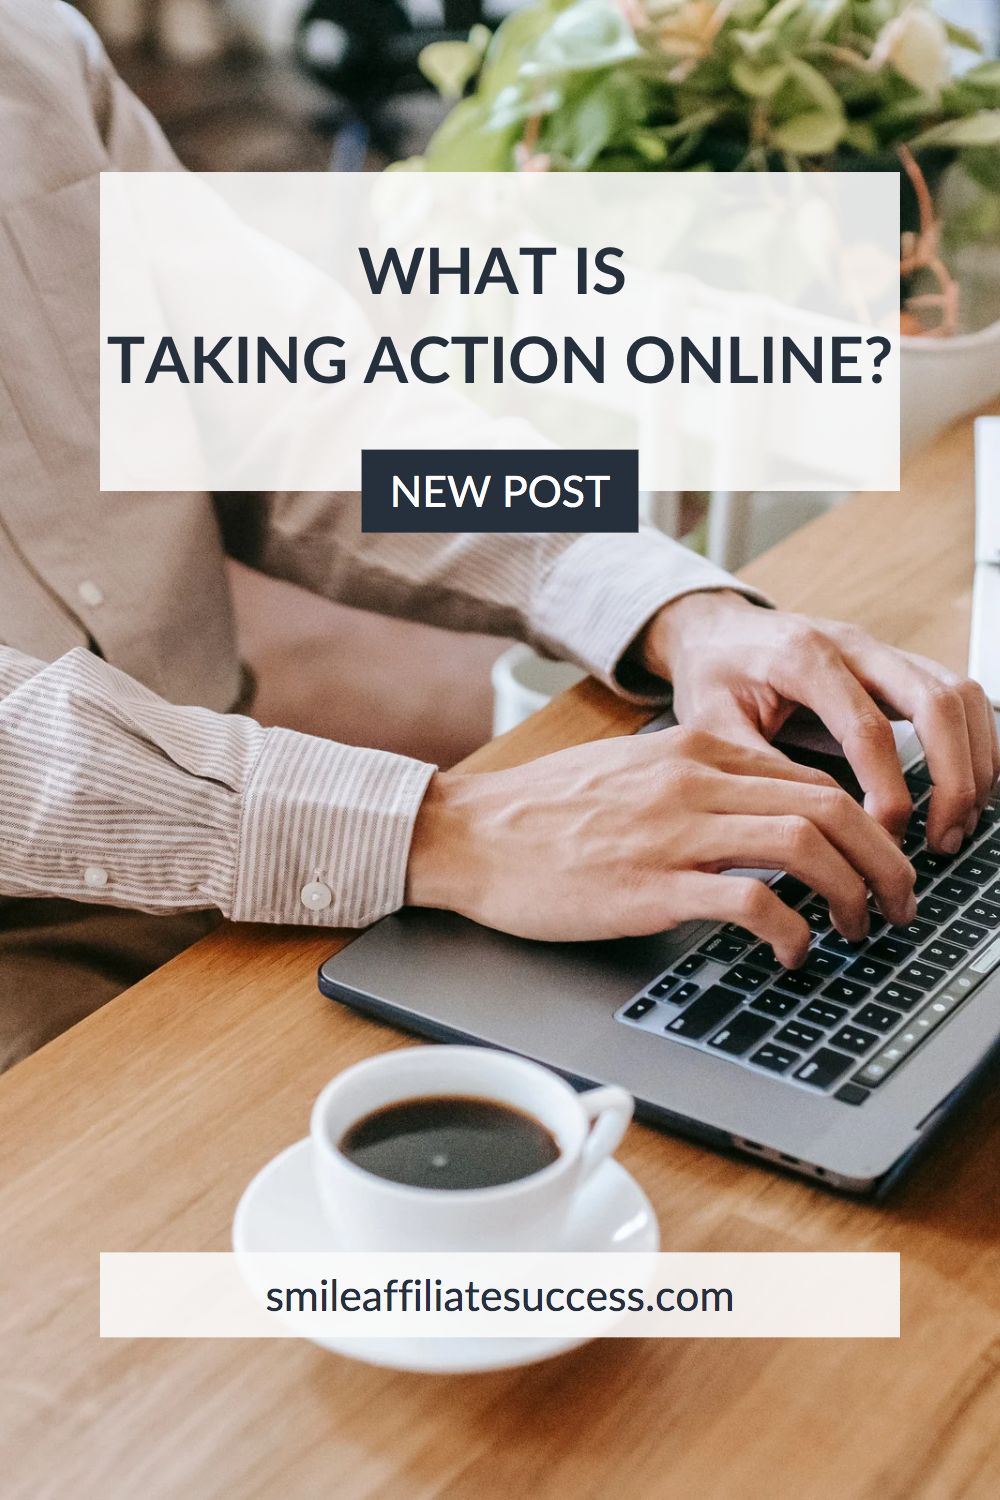 What Is Taking Action Online?